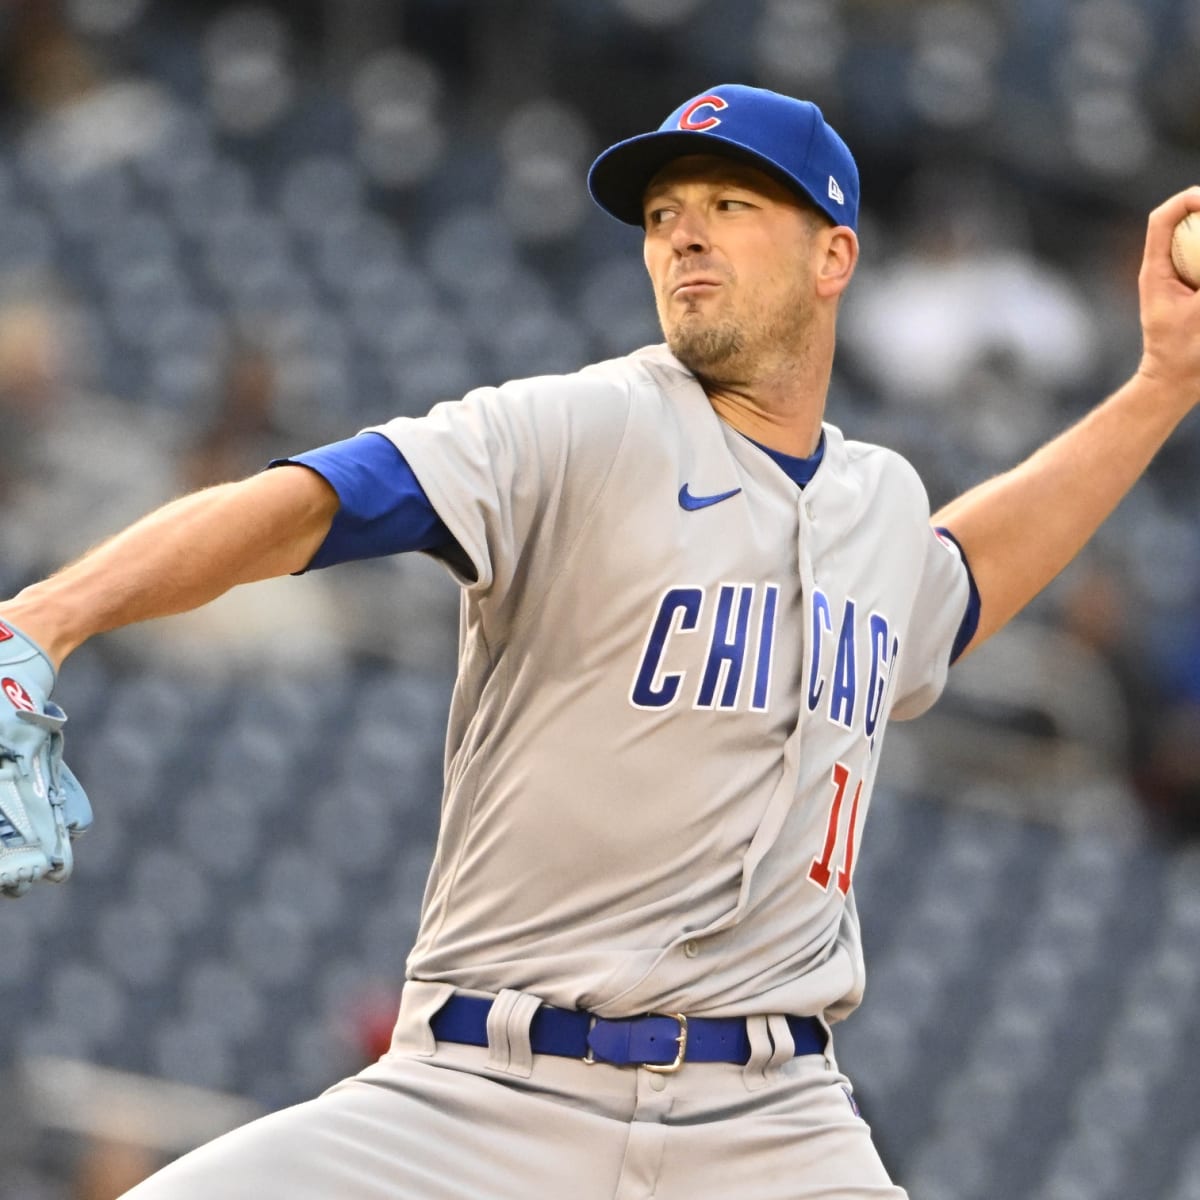 Drew Smyly Dazzles in Chicago Cubs' 5-1 Win Over Washington Nationals -  Fastball